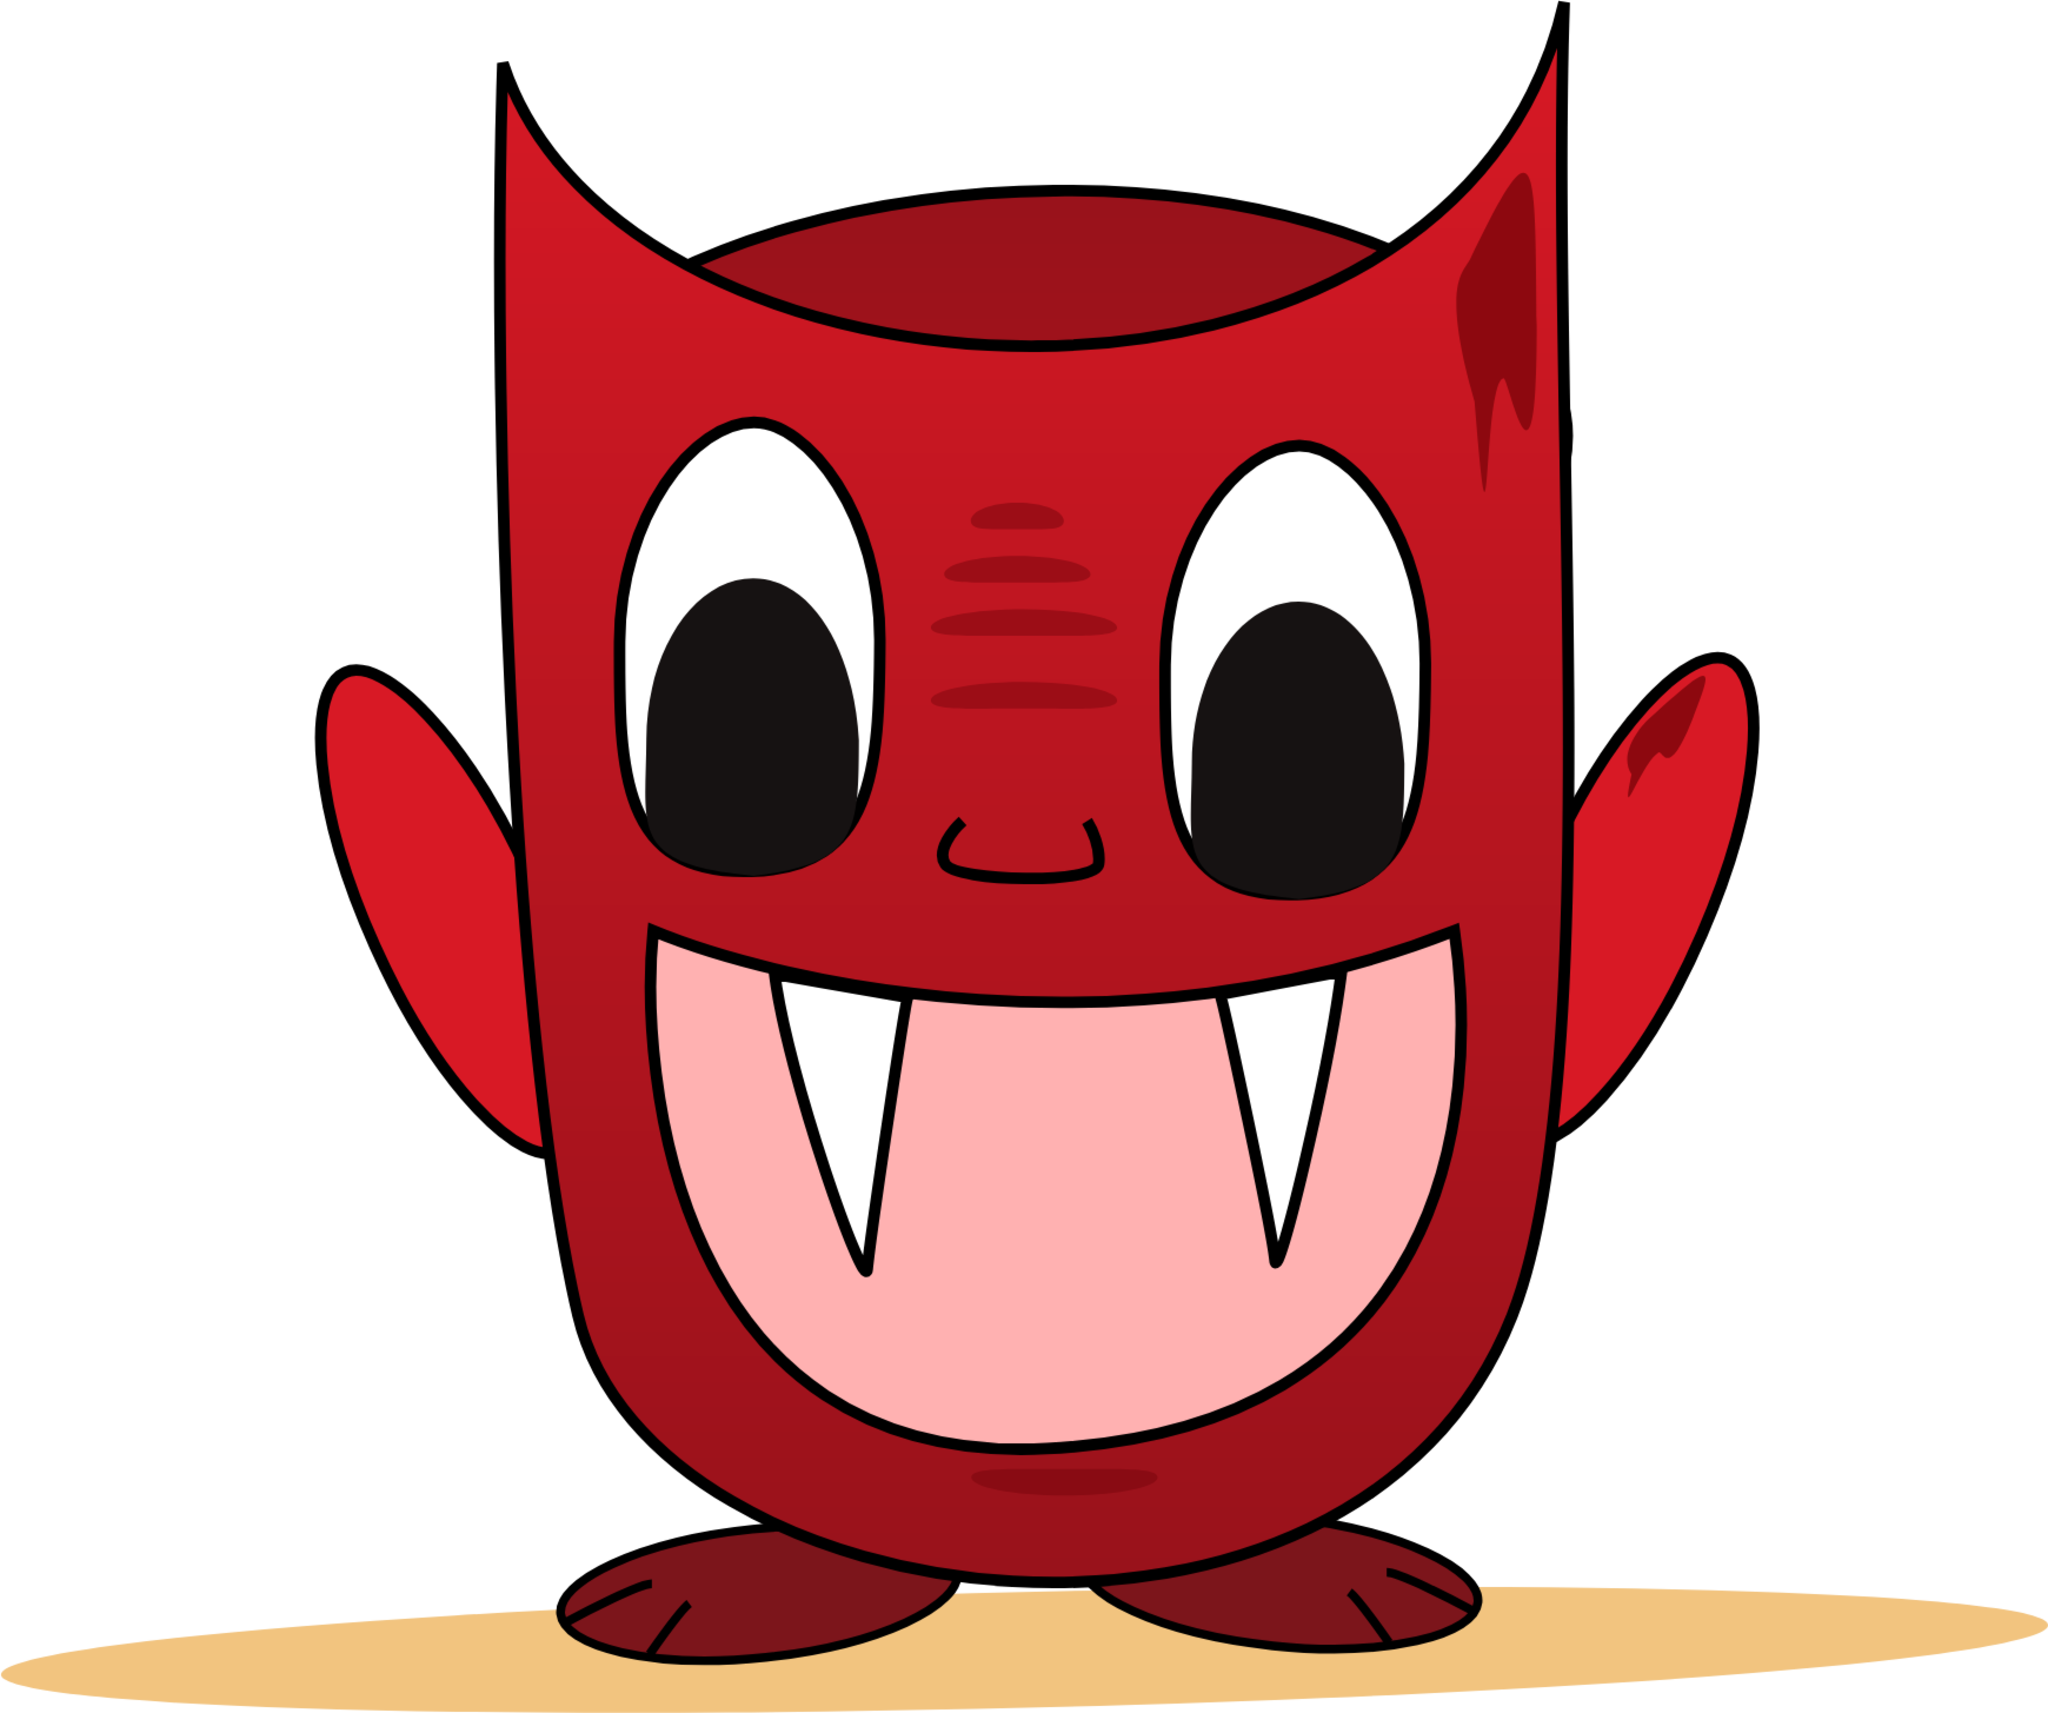 devil cute monster with sharp teeth and small feet icon